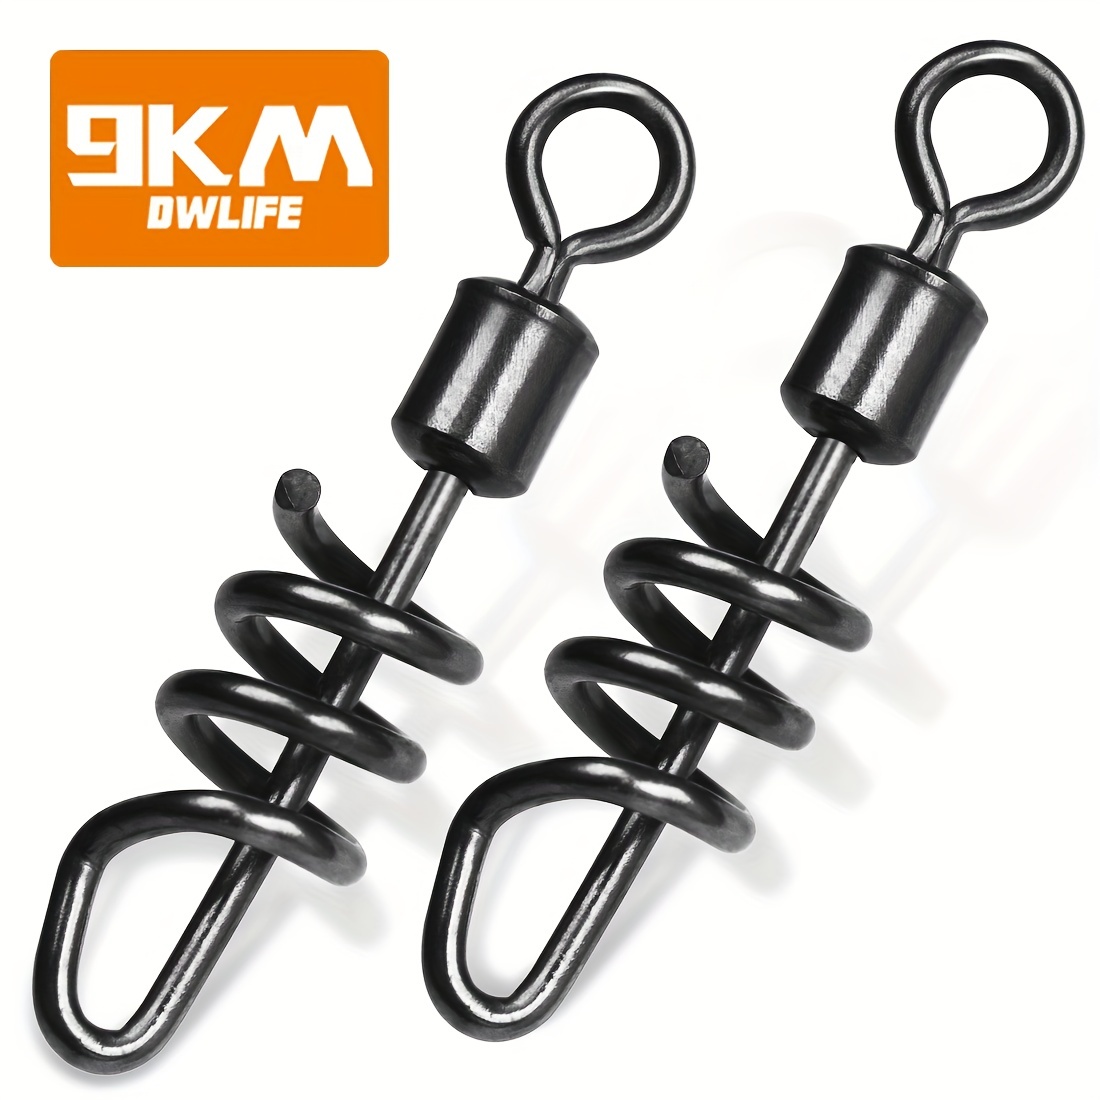 Barrel Fishing Swivels with Safty Snap 100pcs Black Fishing Snap Swivels  Saltwater Freshwater Swivels Fishing Tackles Stainless Steel Interlock  Snaps